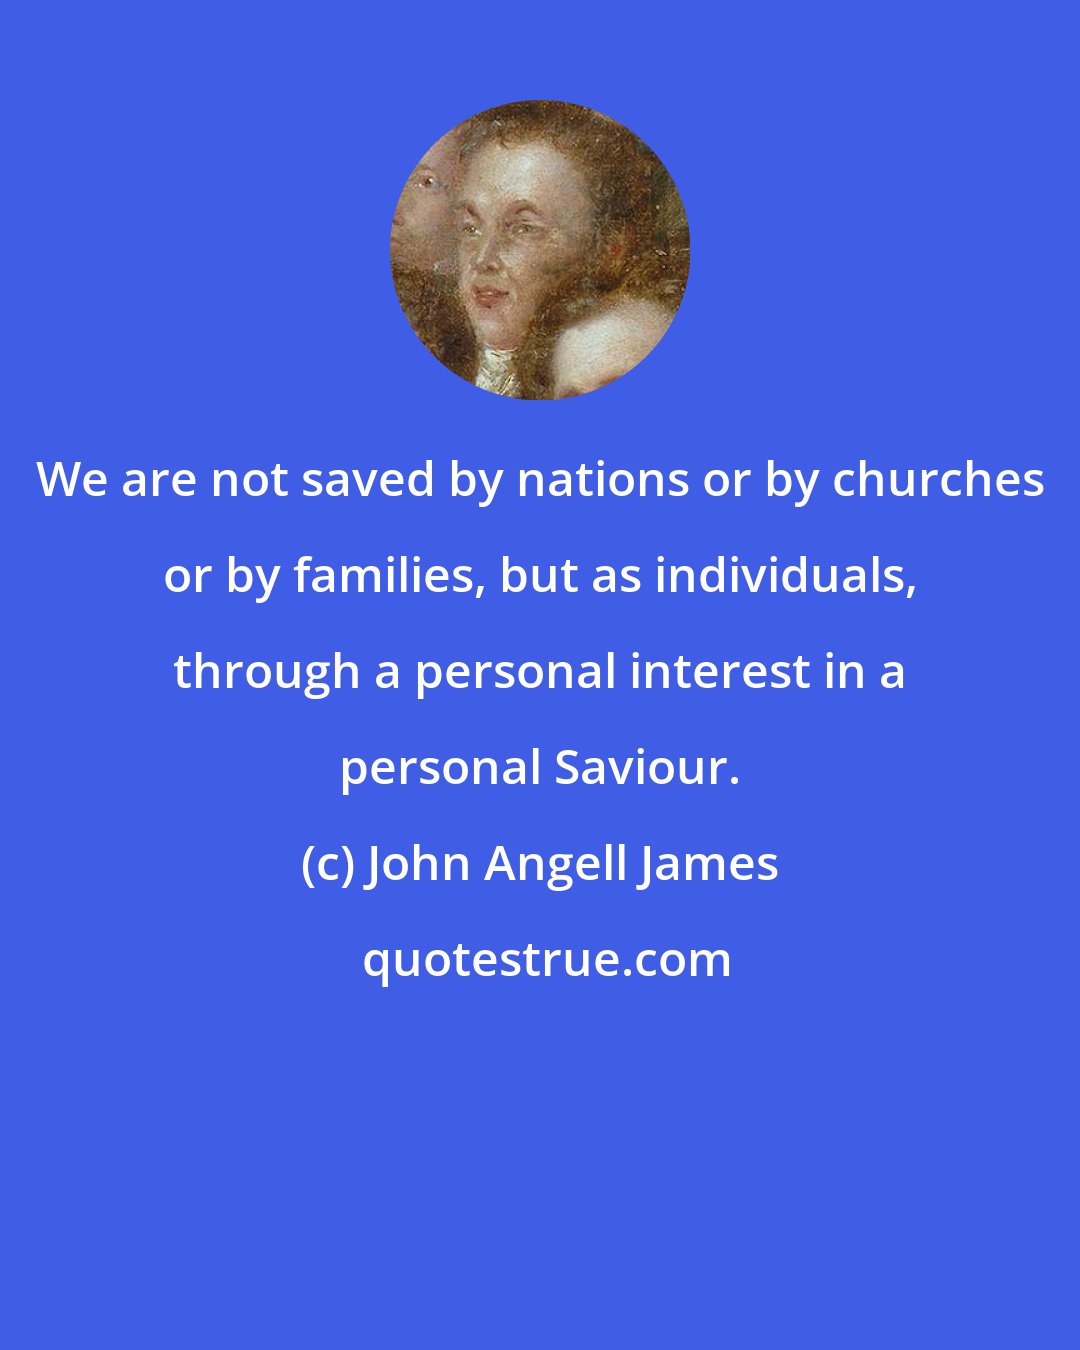 John Angell James: We are not saved by nations or by churches or by families, but as individuals, through a personal interest in a personal Saviour.